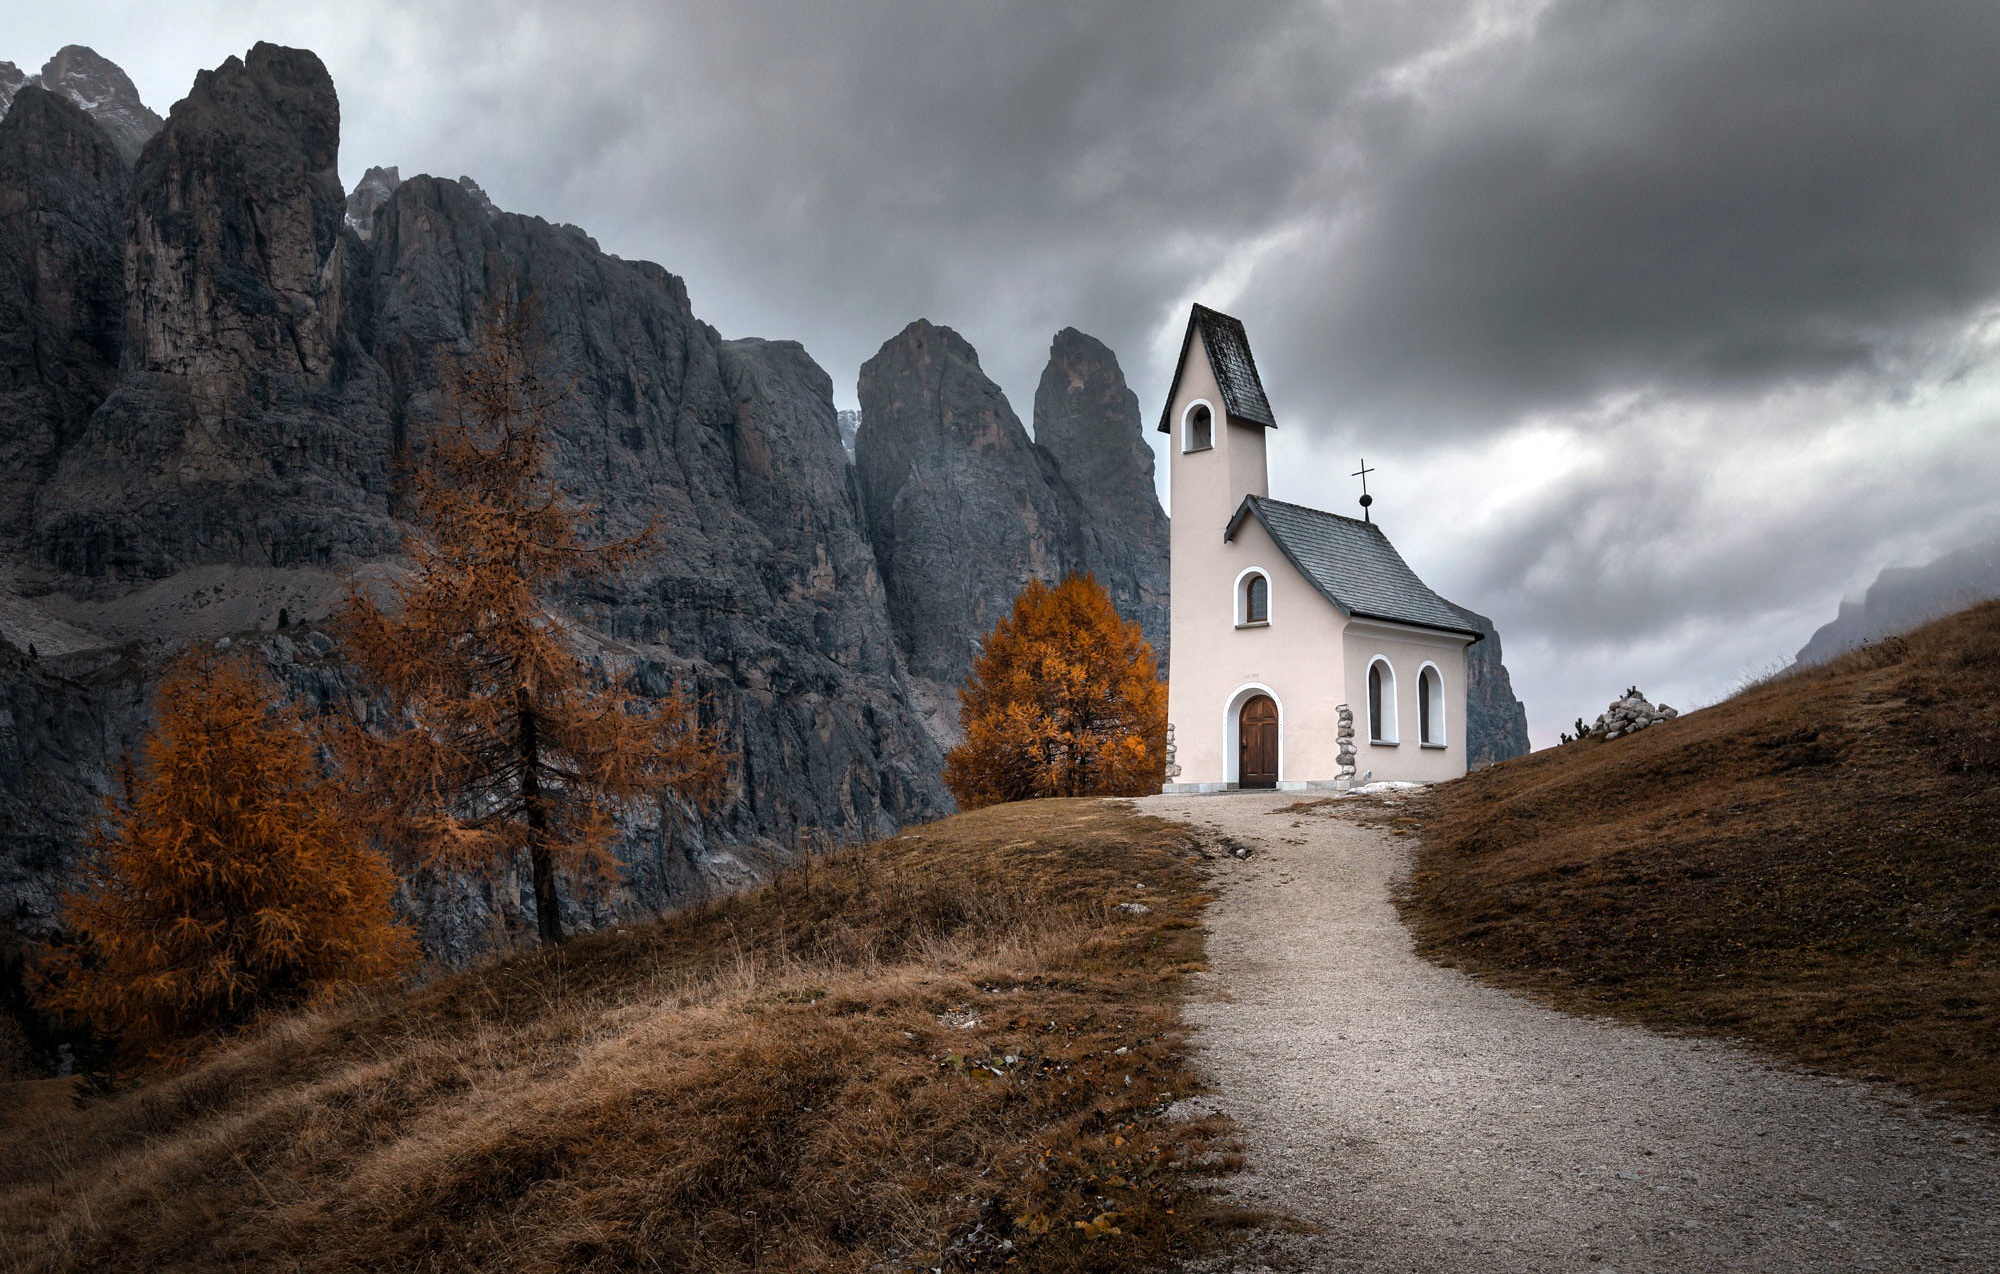 Building Dolomite Alps Outdoors Church Fall 2000x1274